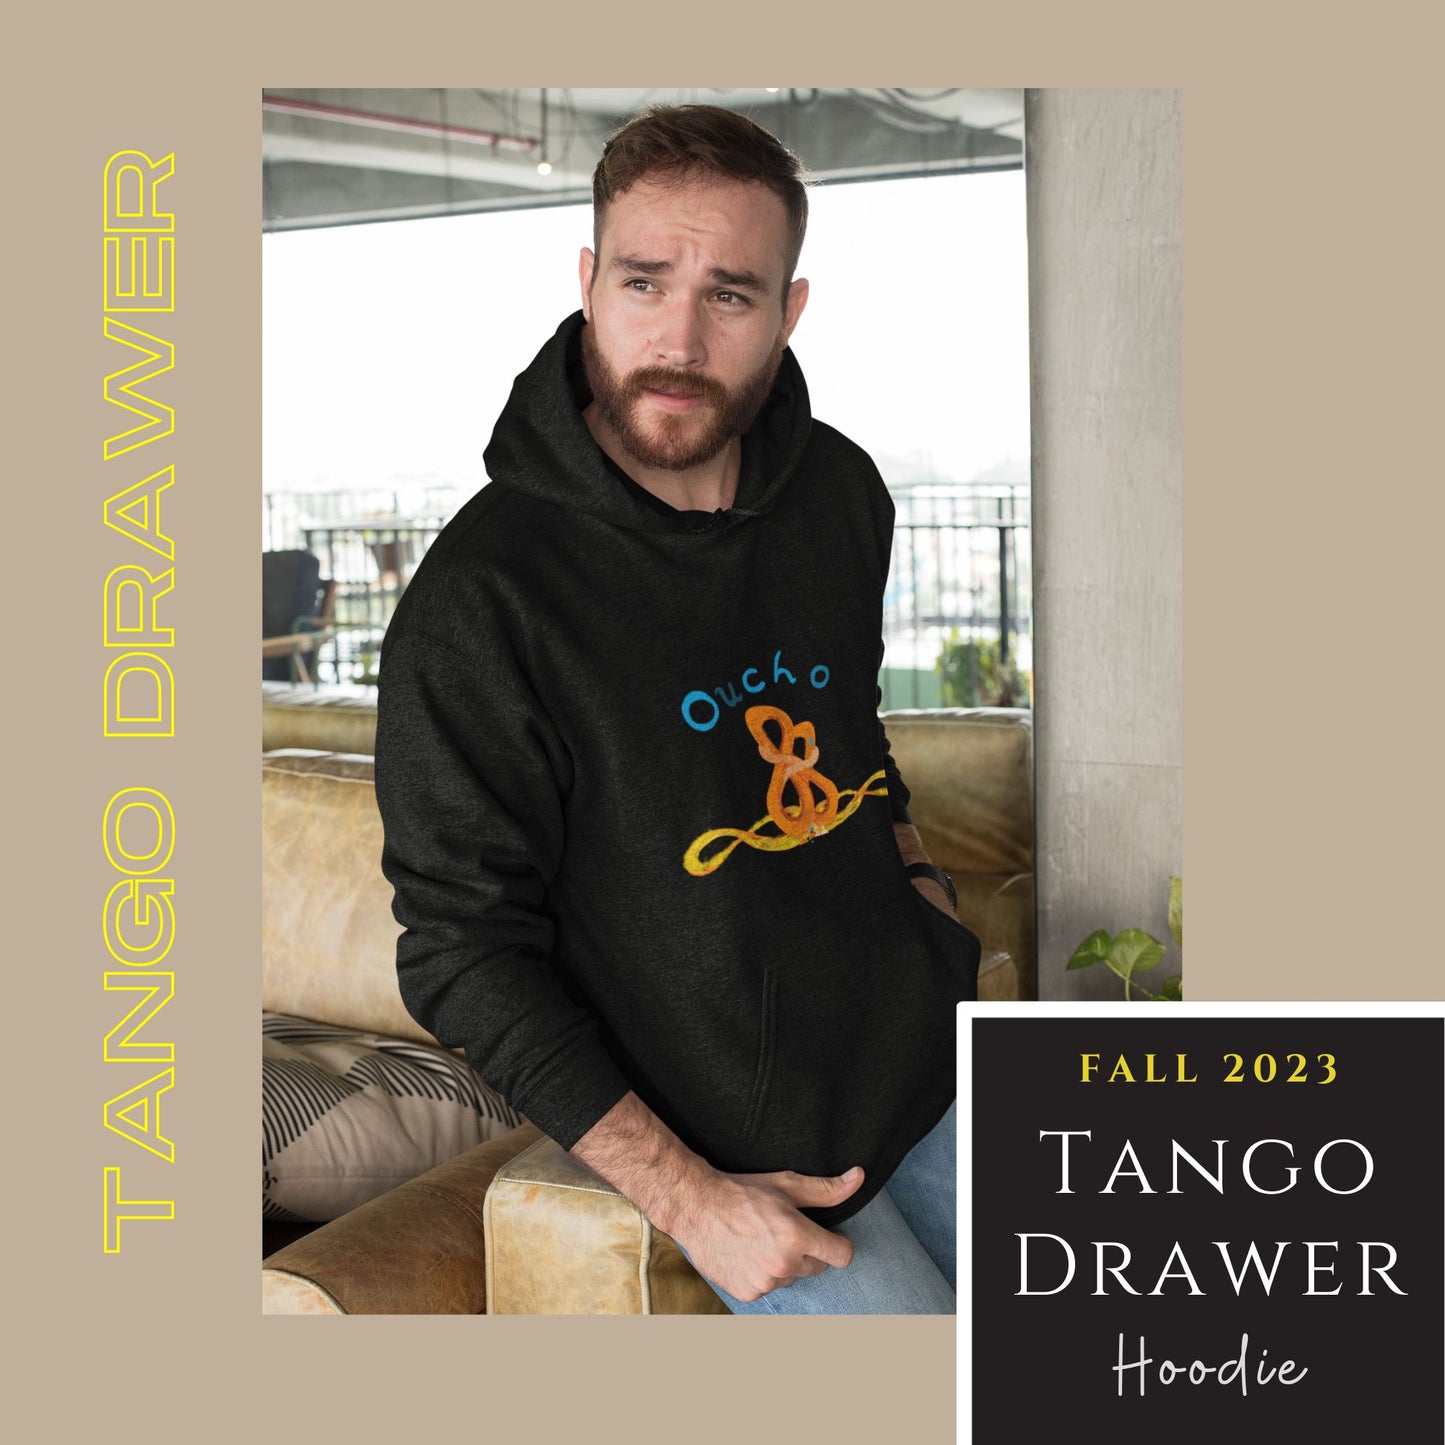 Tango Drawer Oucho Hoodie (unisex)